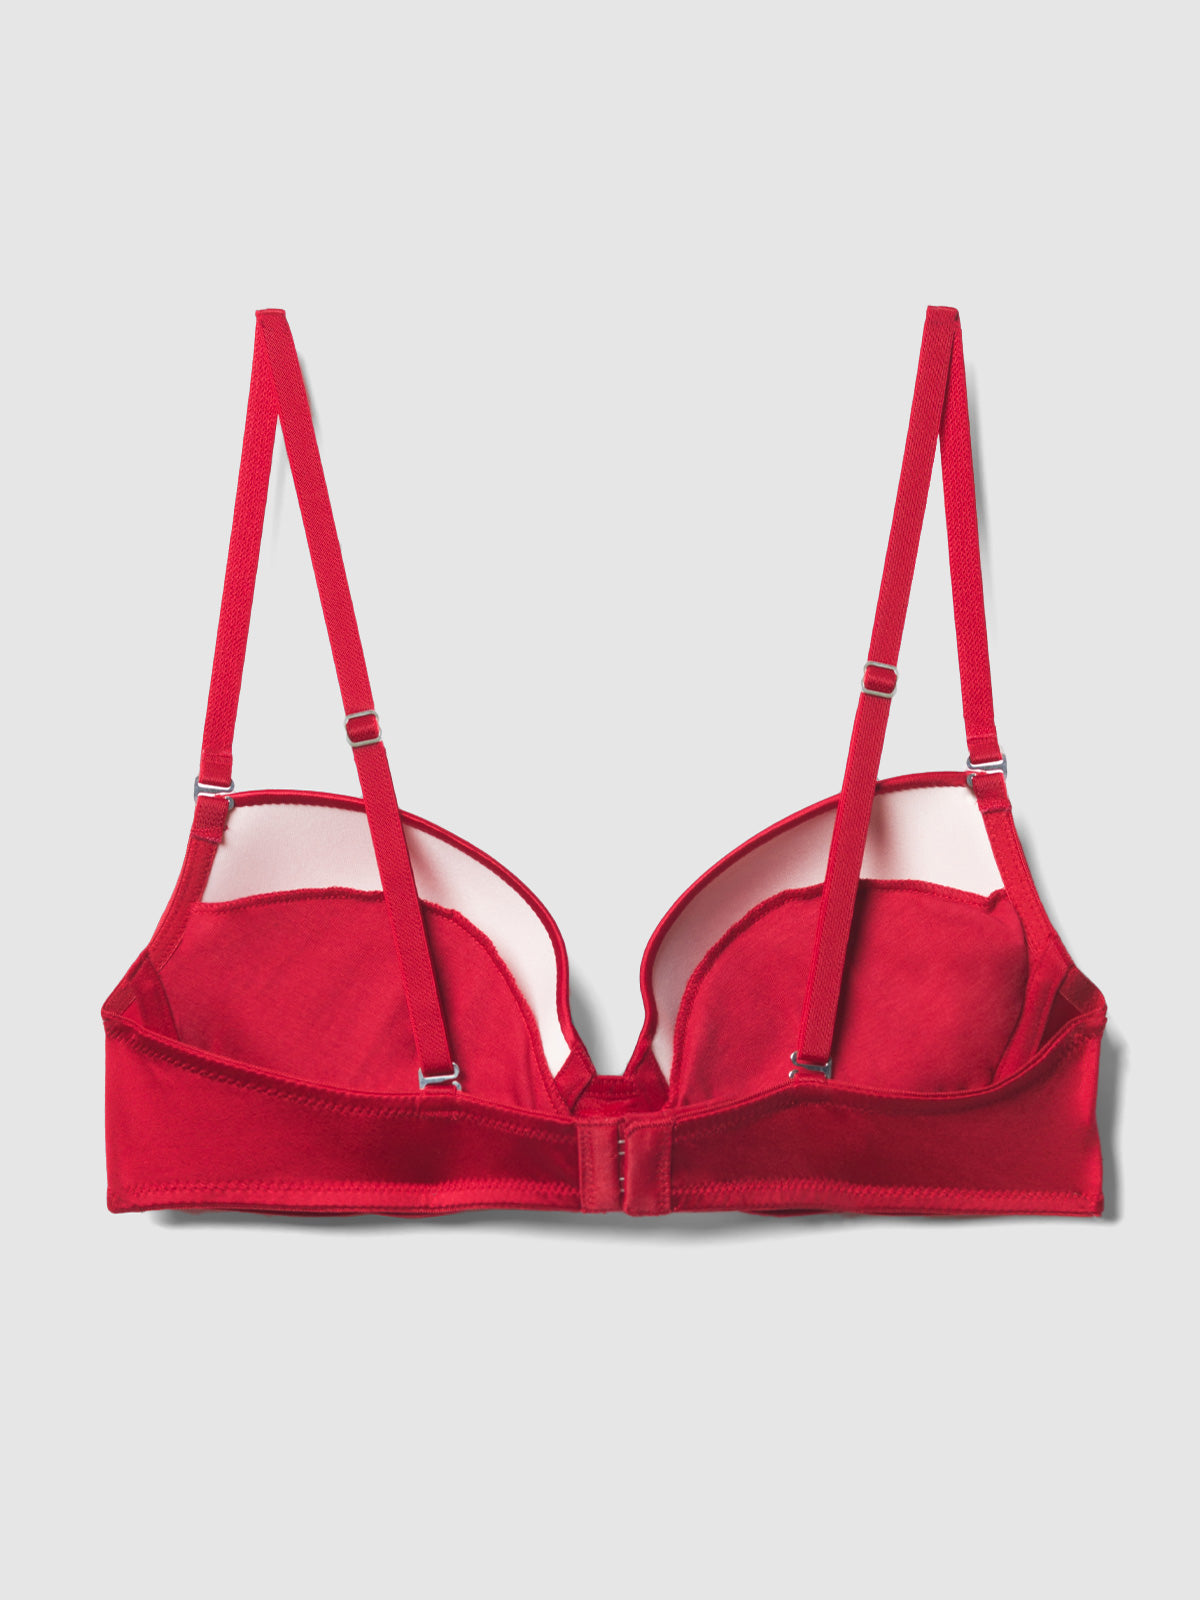 Athens Push-Up Bra in Cotton 